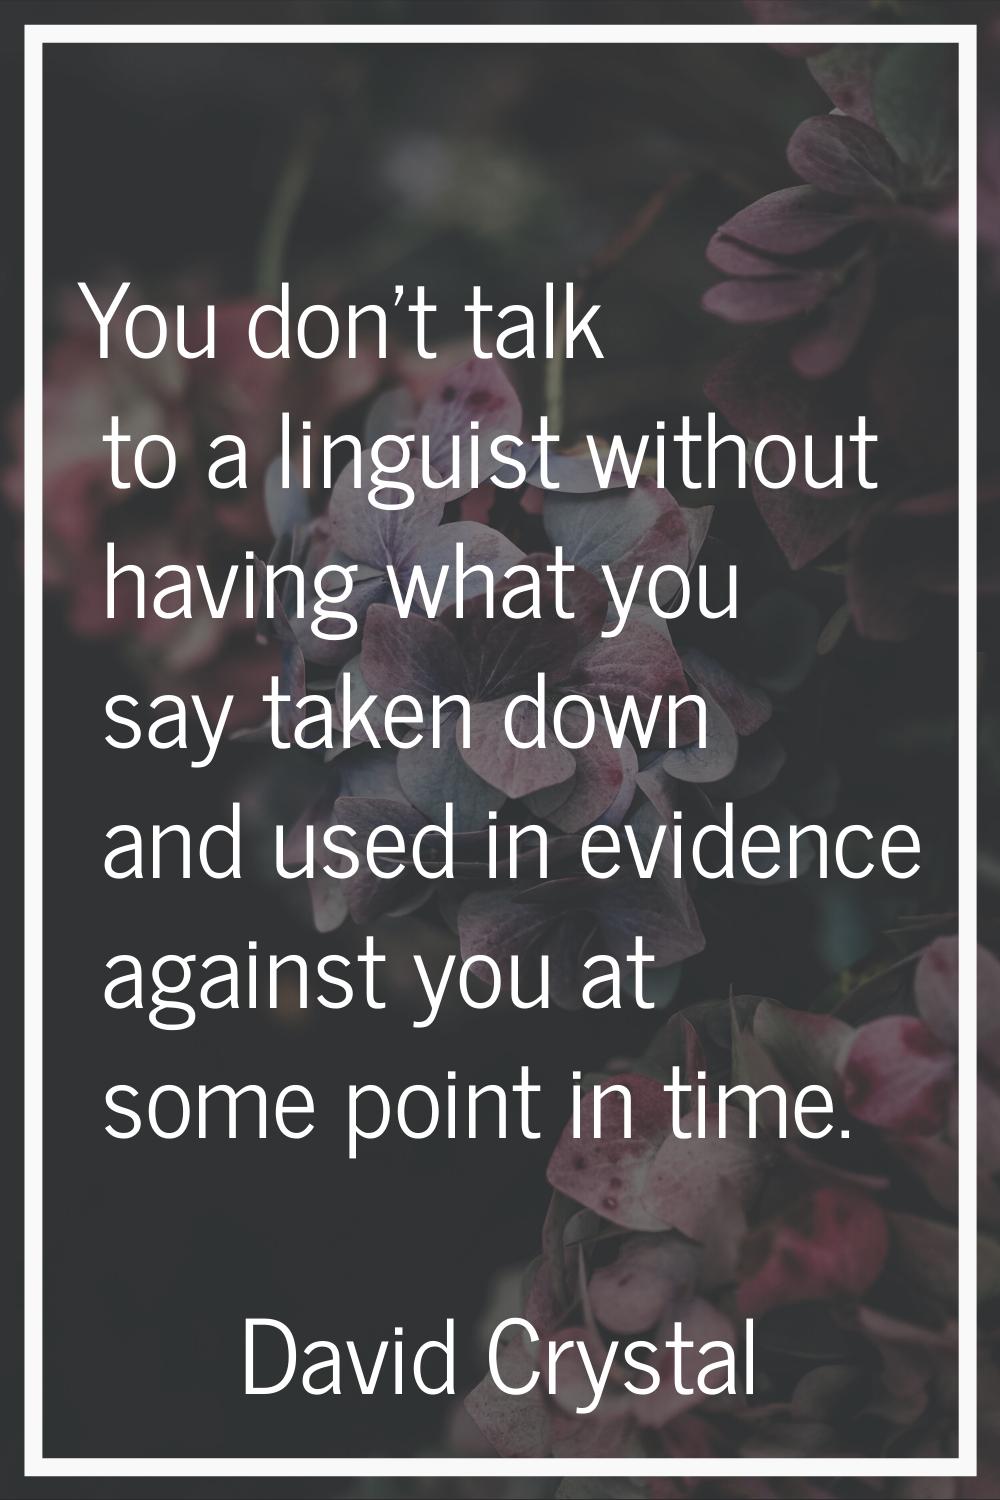 You don't talk to a linguist without having what you say taken down and used in evidence against yo